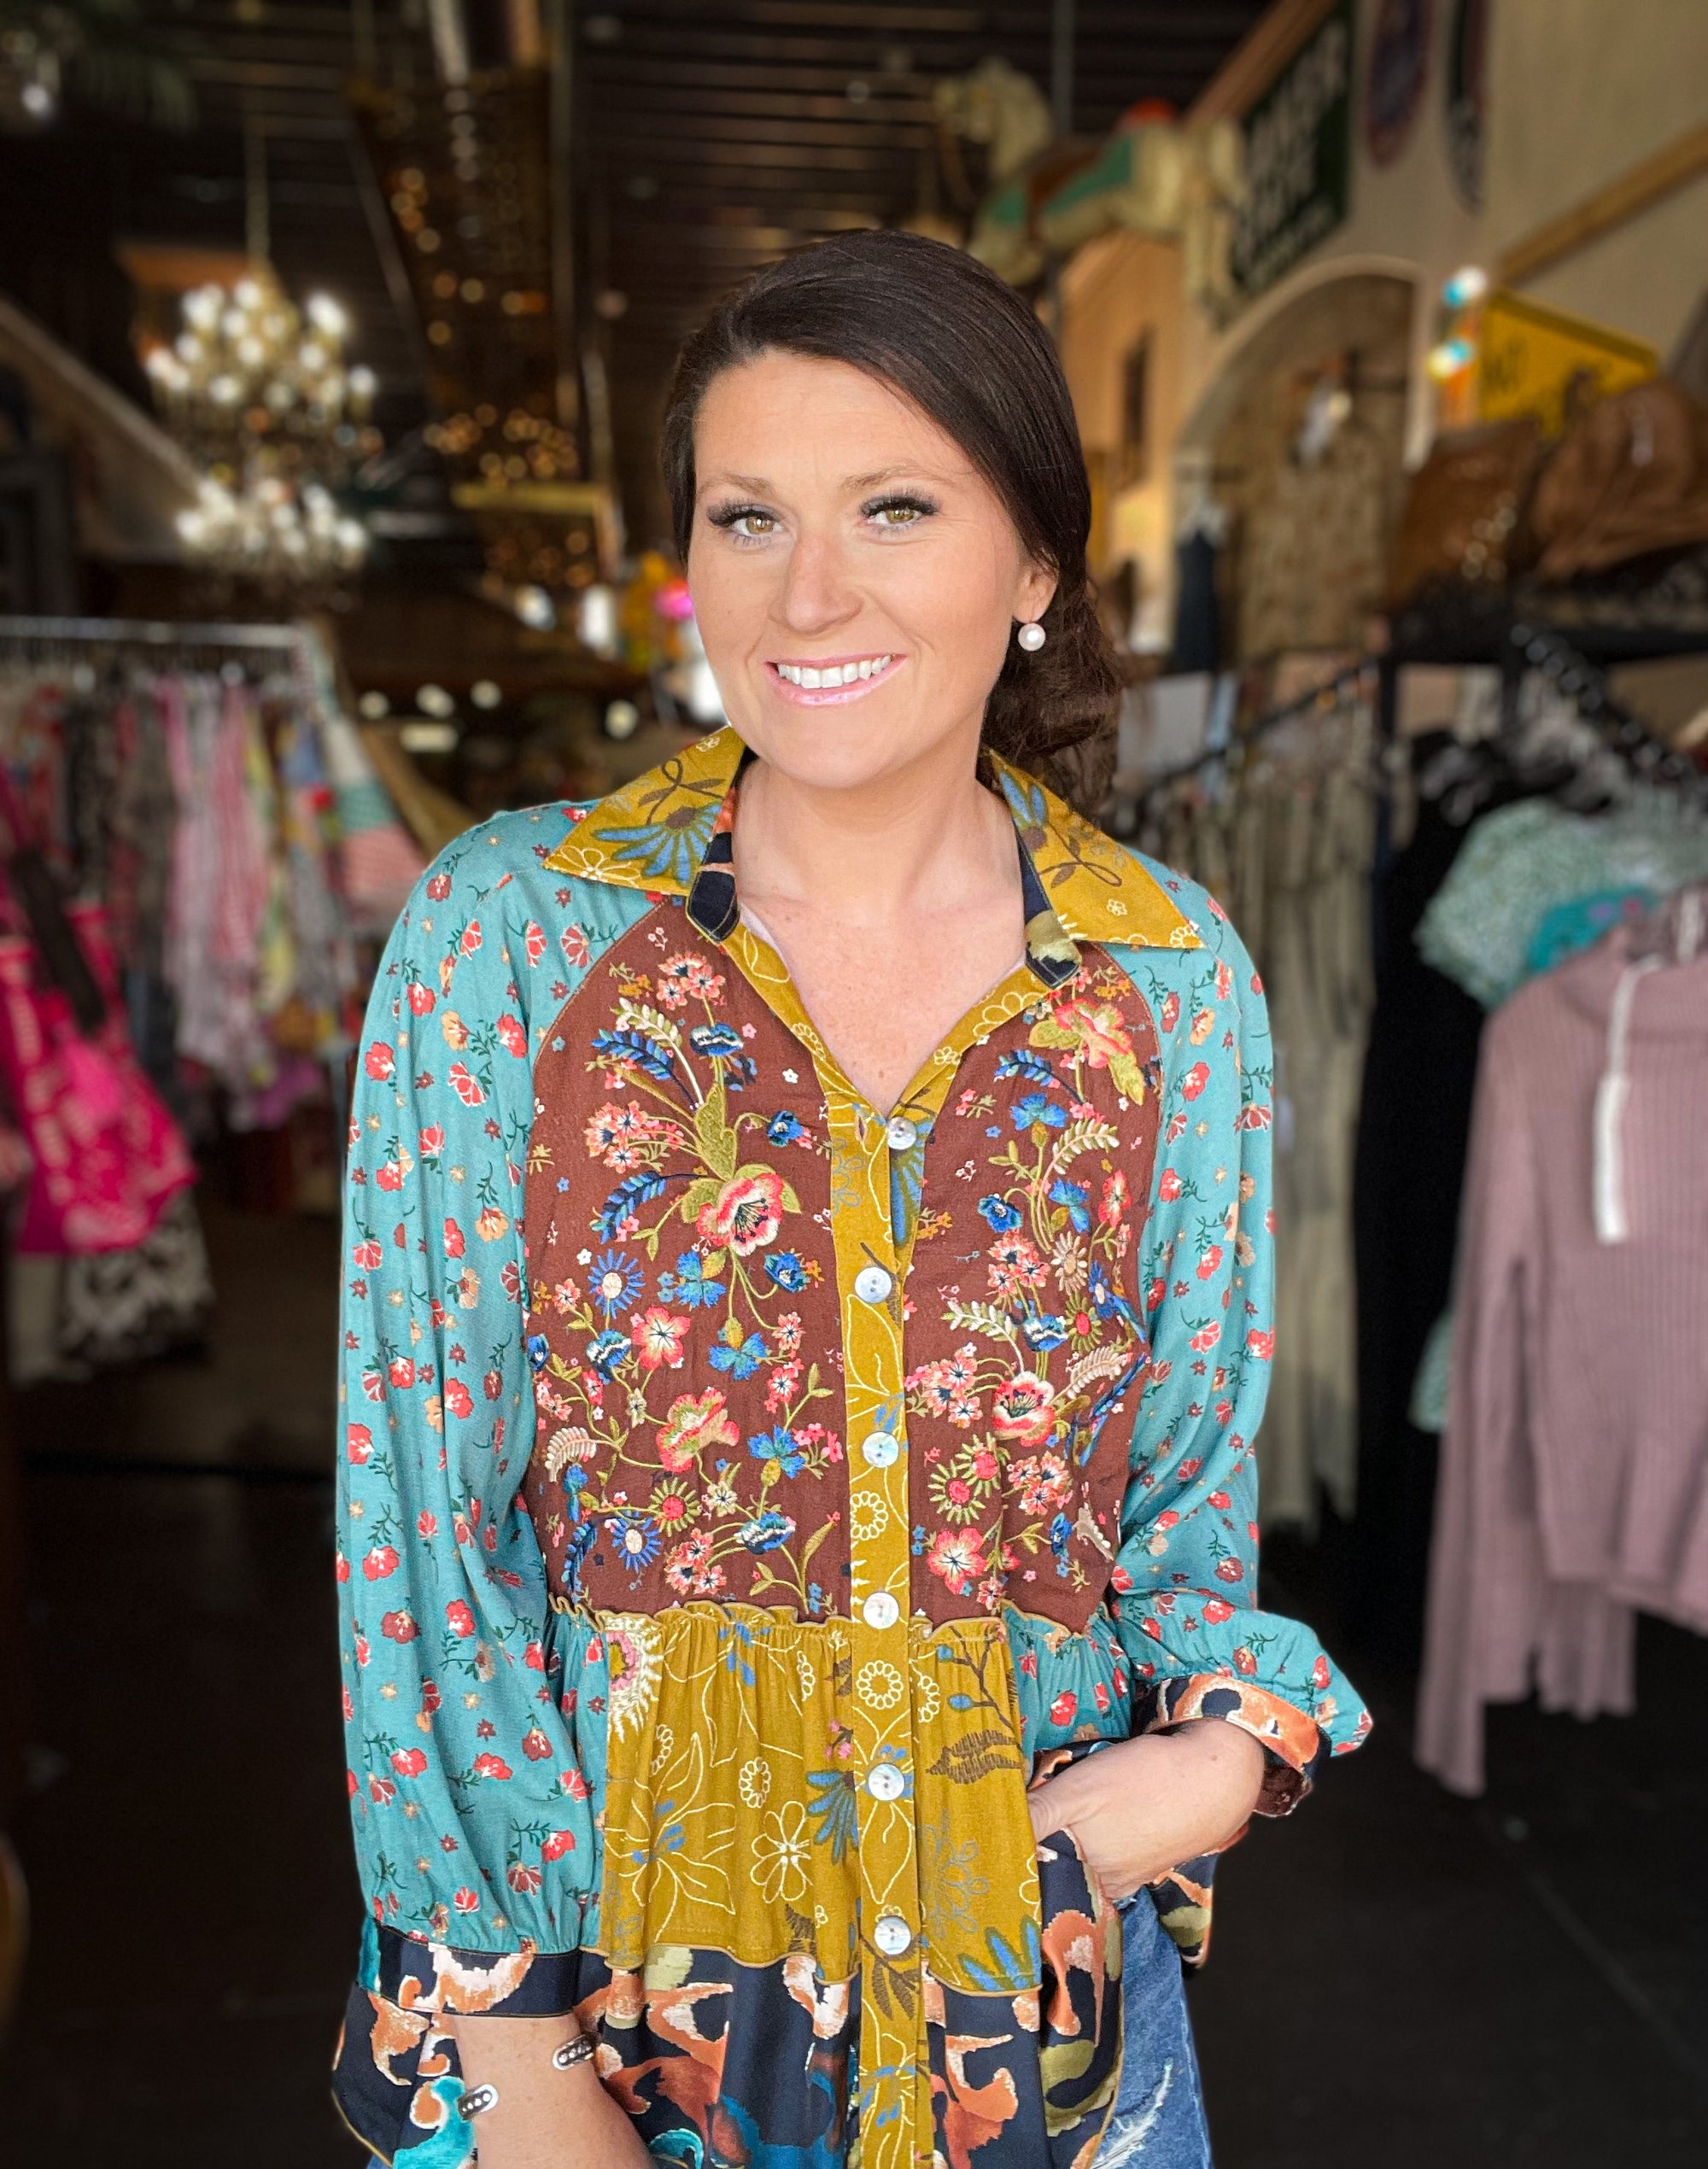 John Mark | Tops - Teal Multi Floral Embroidery Tunic